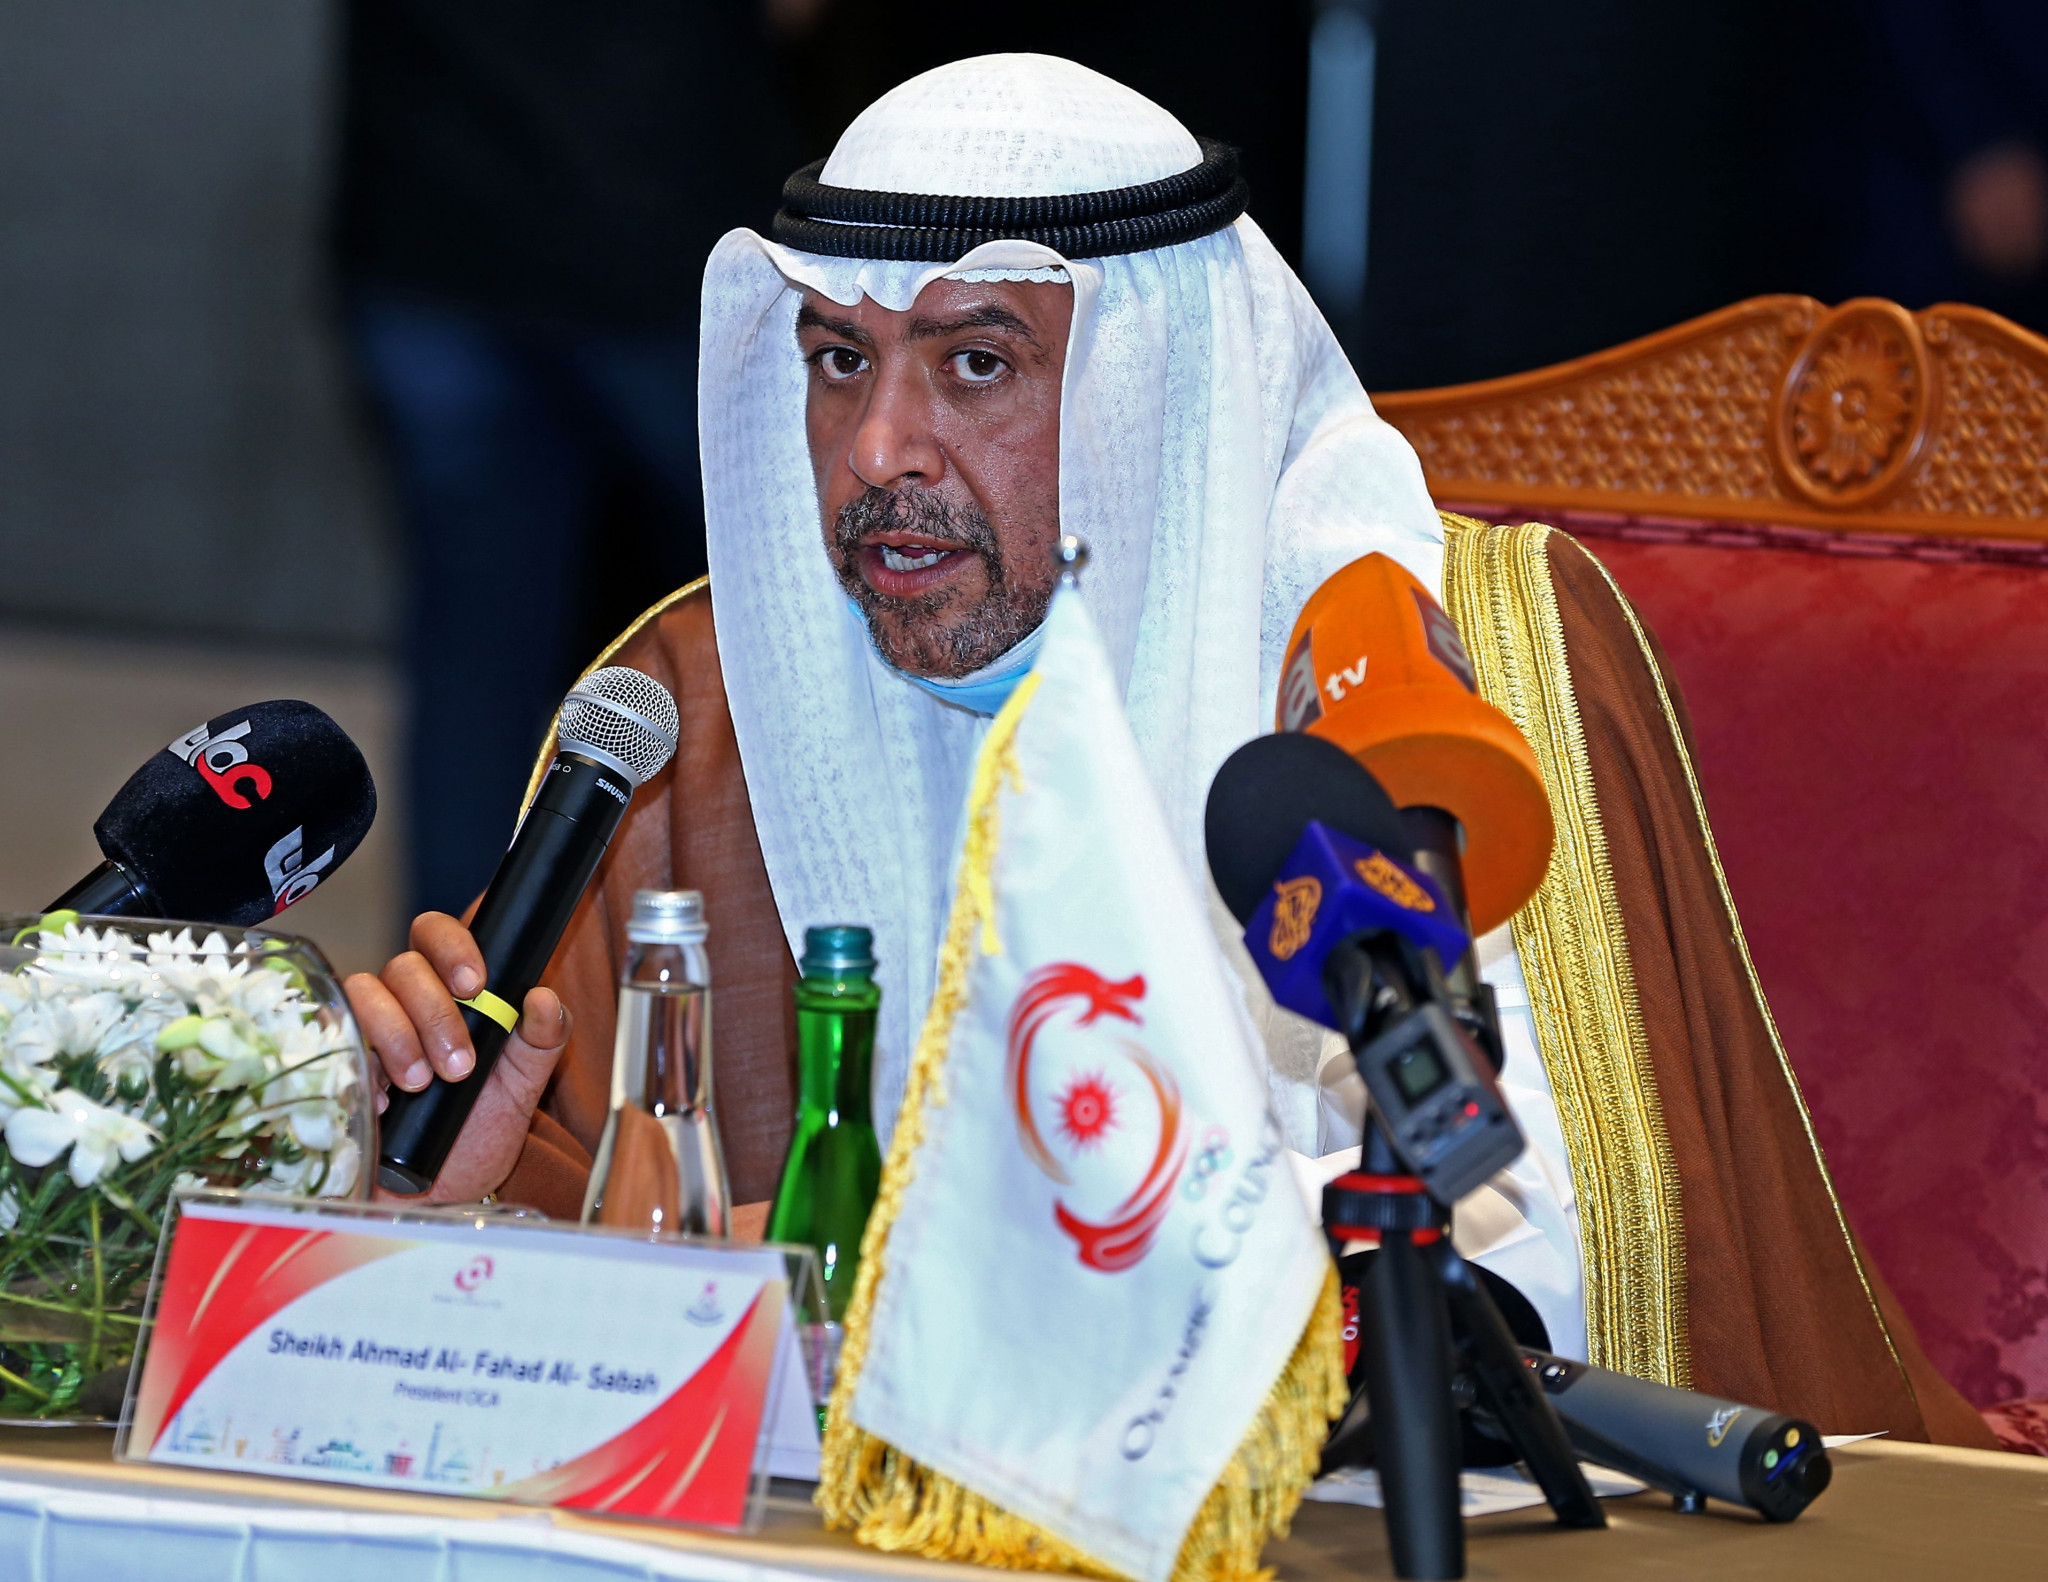 Exclusive: Sheikh Ahmad warned by IOC about interfering in OCA election to replace him as President 